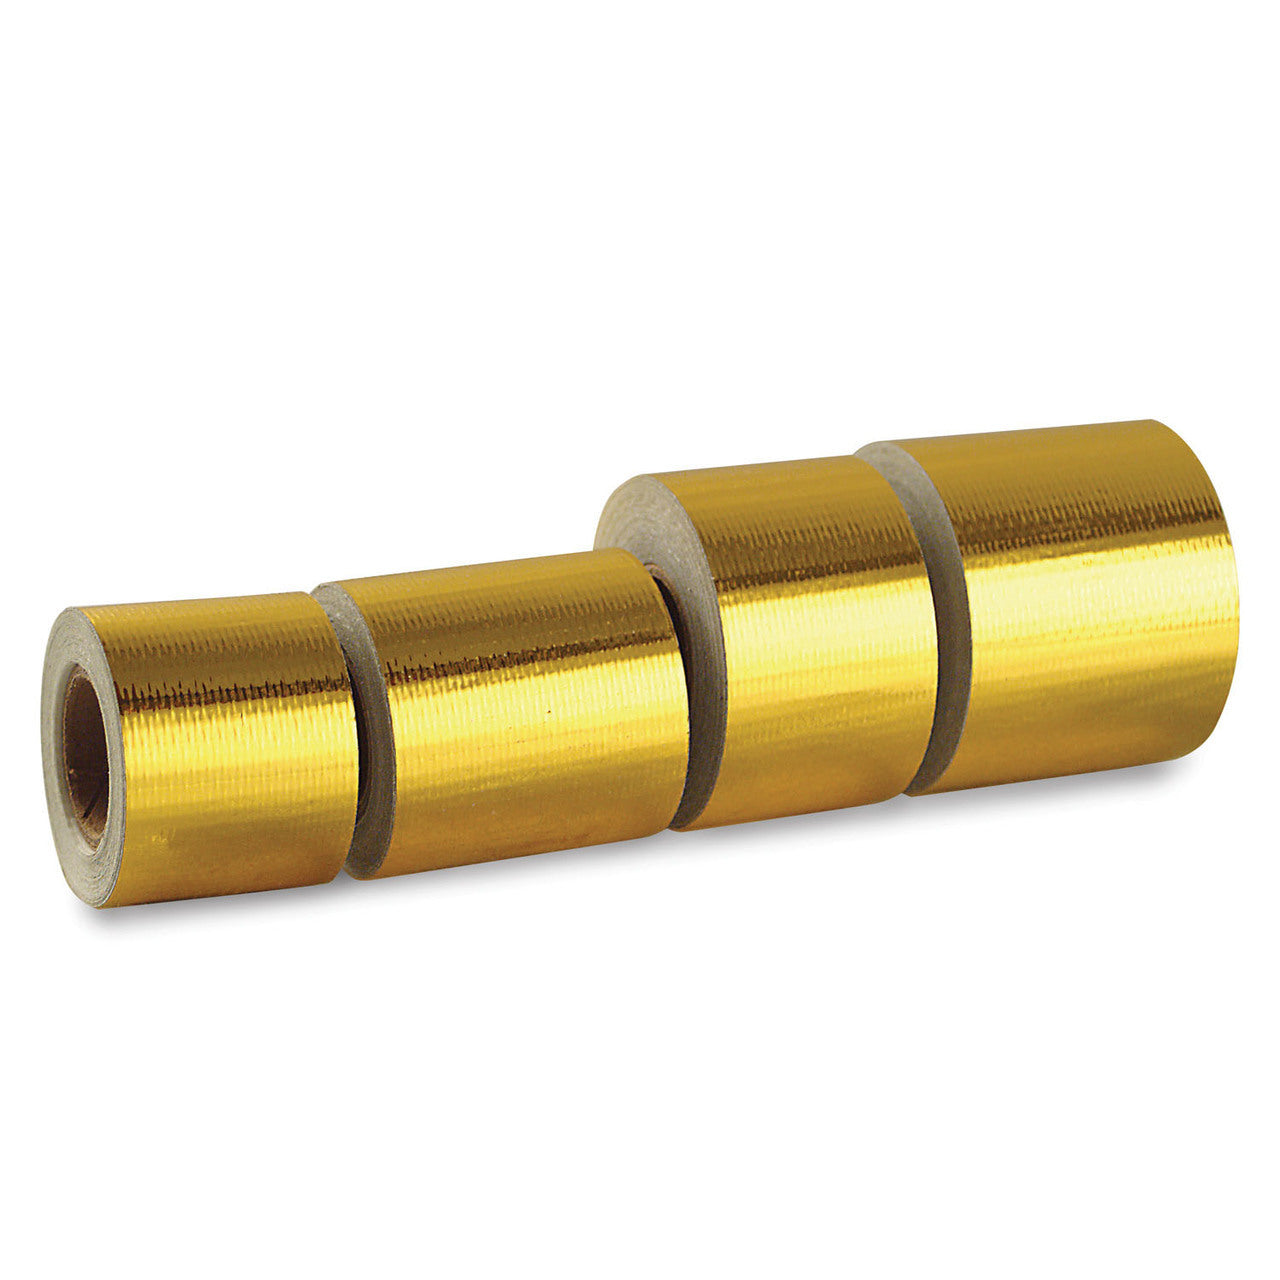 DEI 010397 Reflect-A-GOLD 2" x 30ft Tape Roll Photo-2 